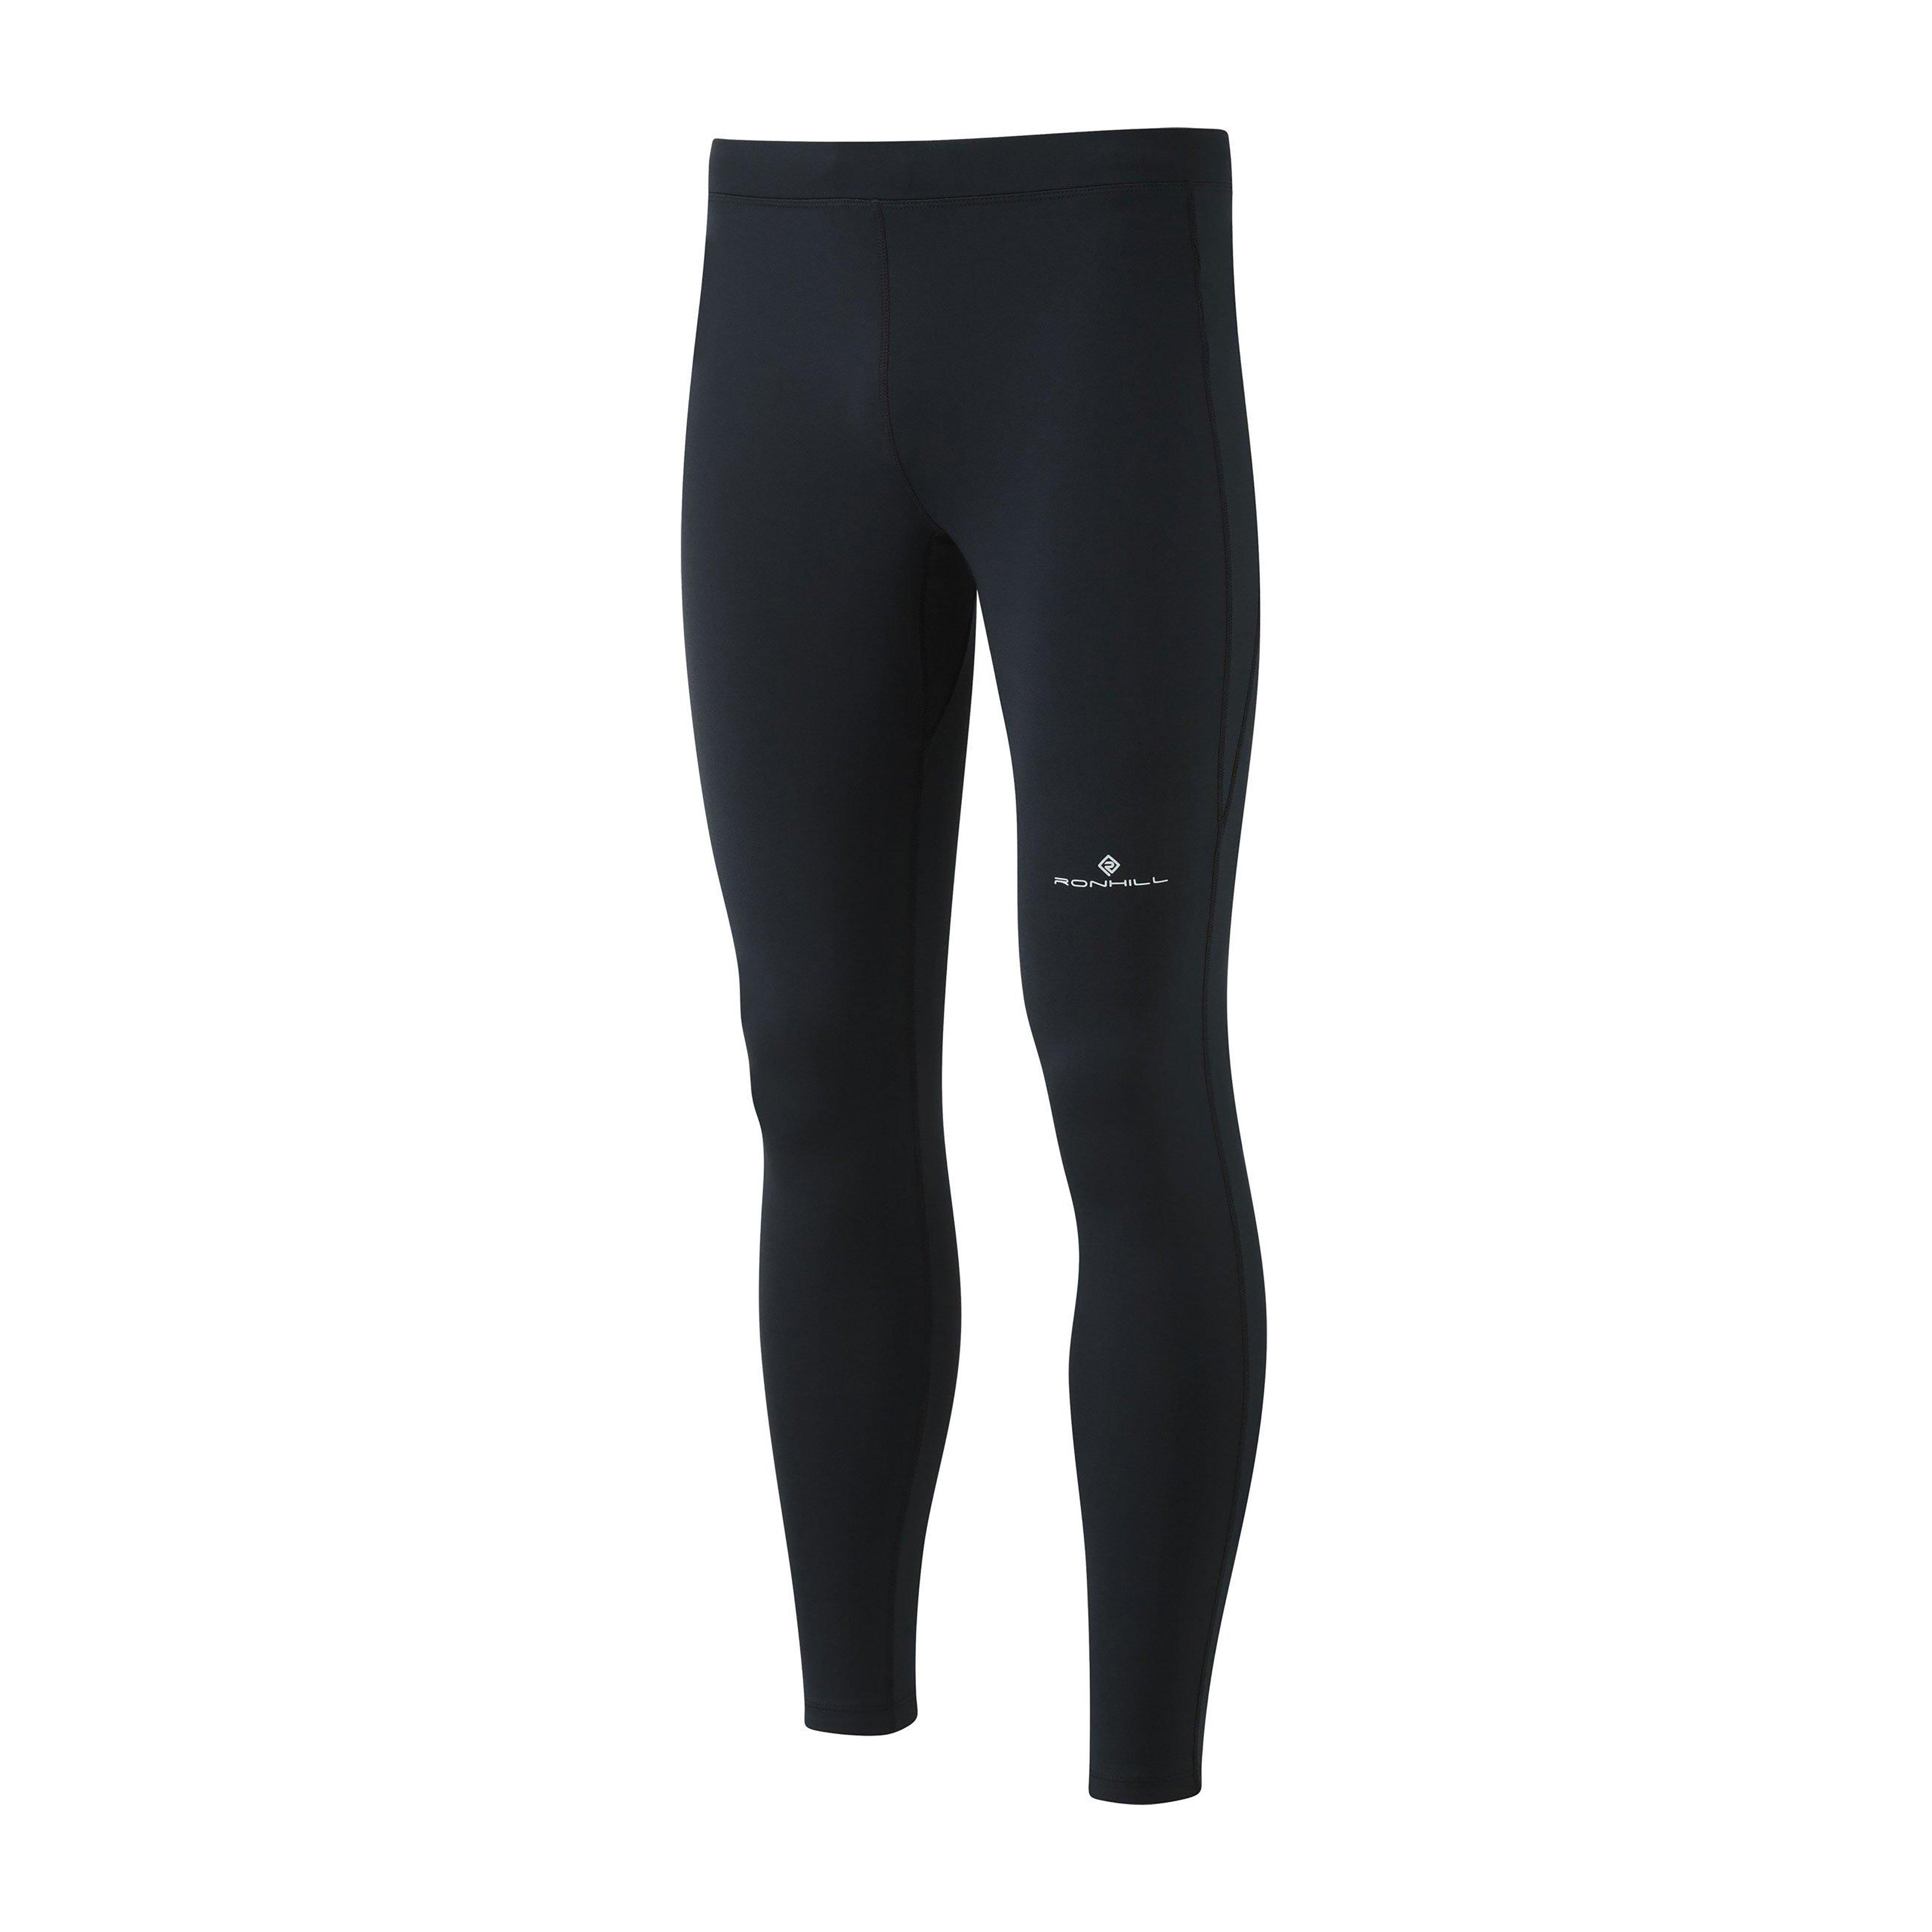 Ronhill Men's Everyday Run Tight Review